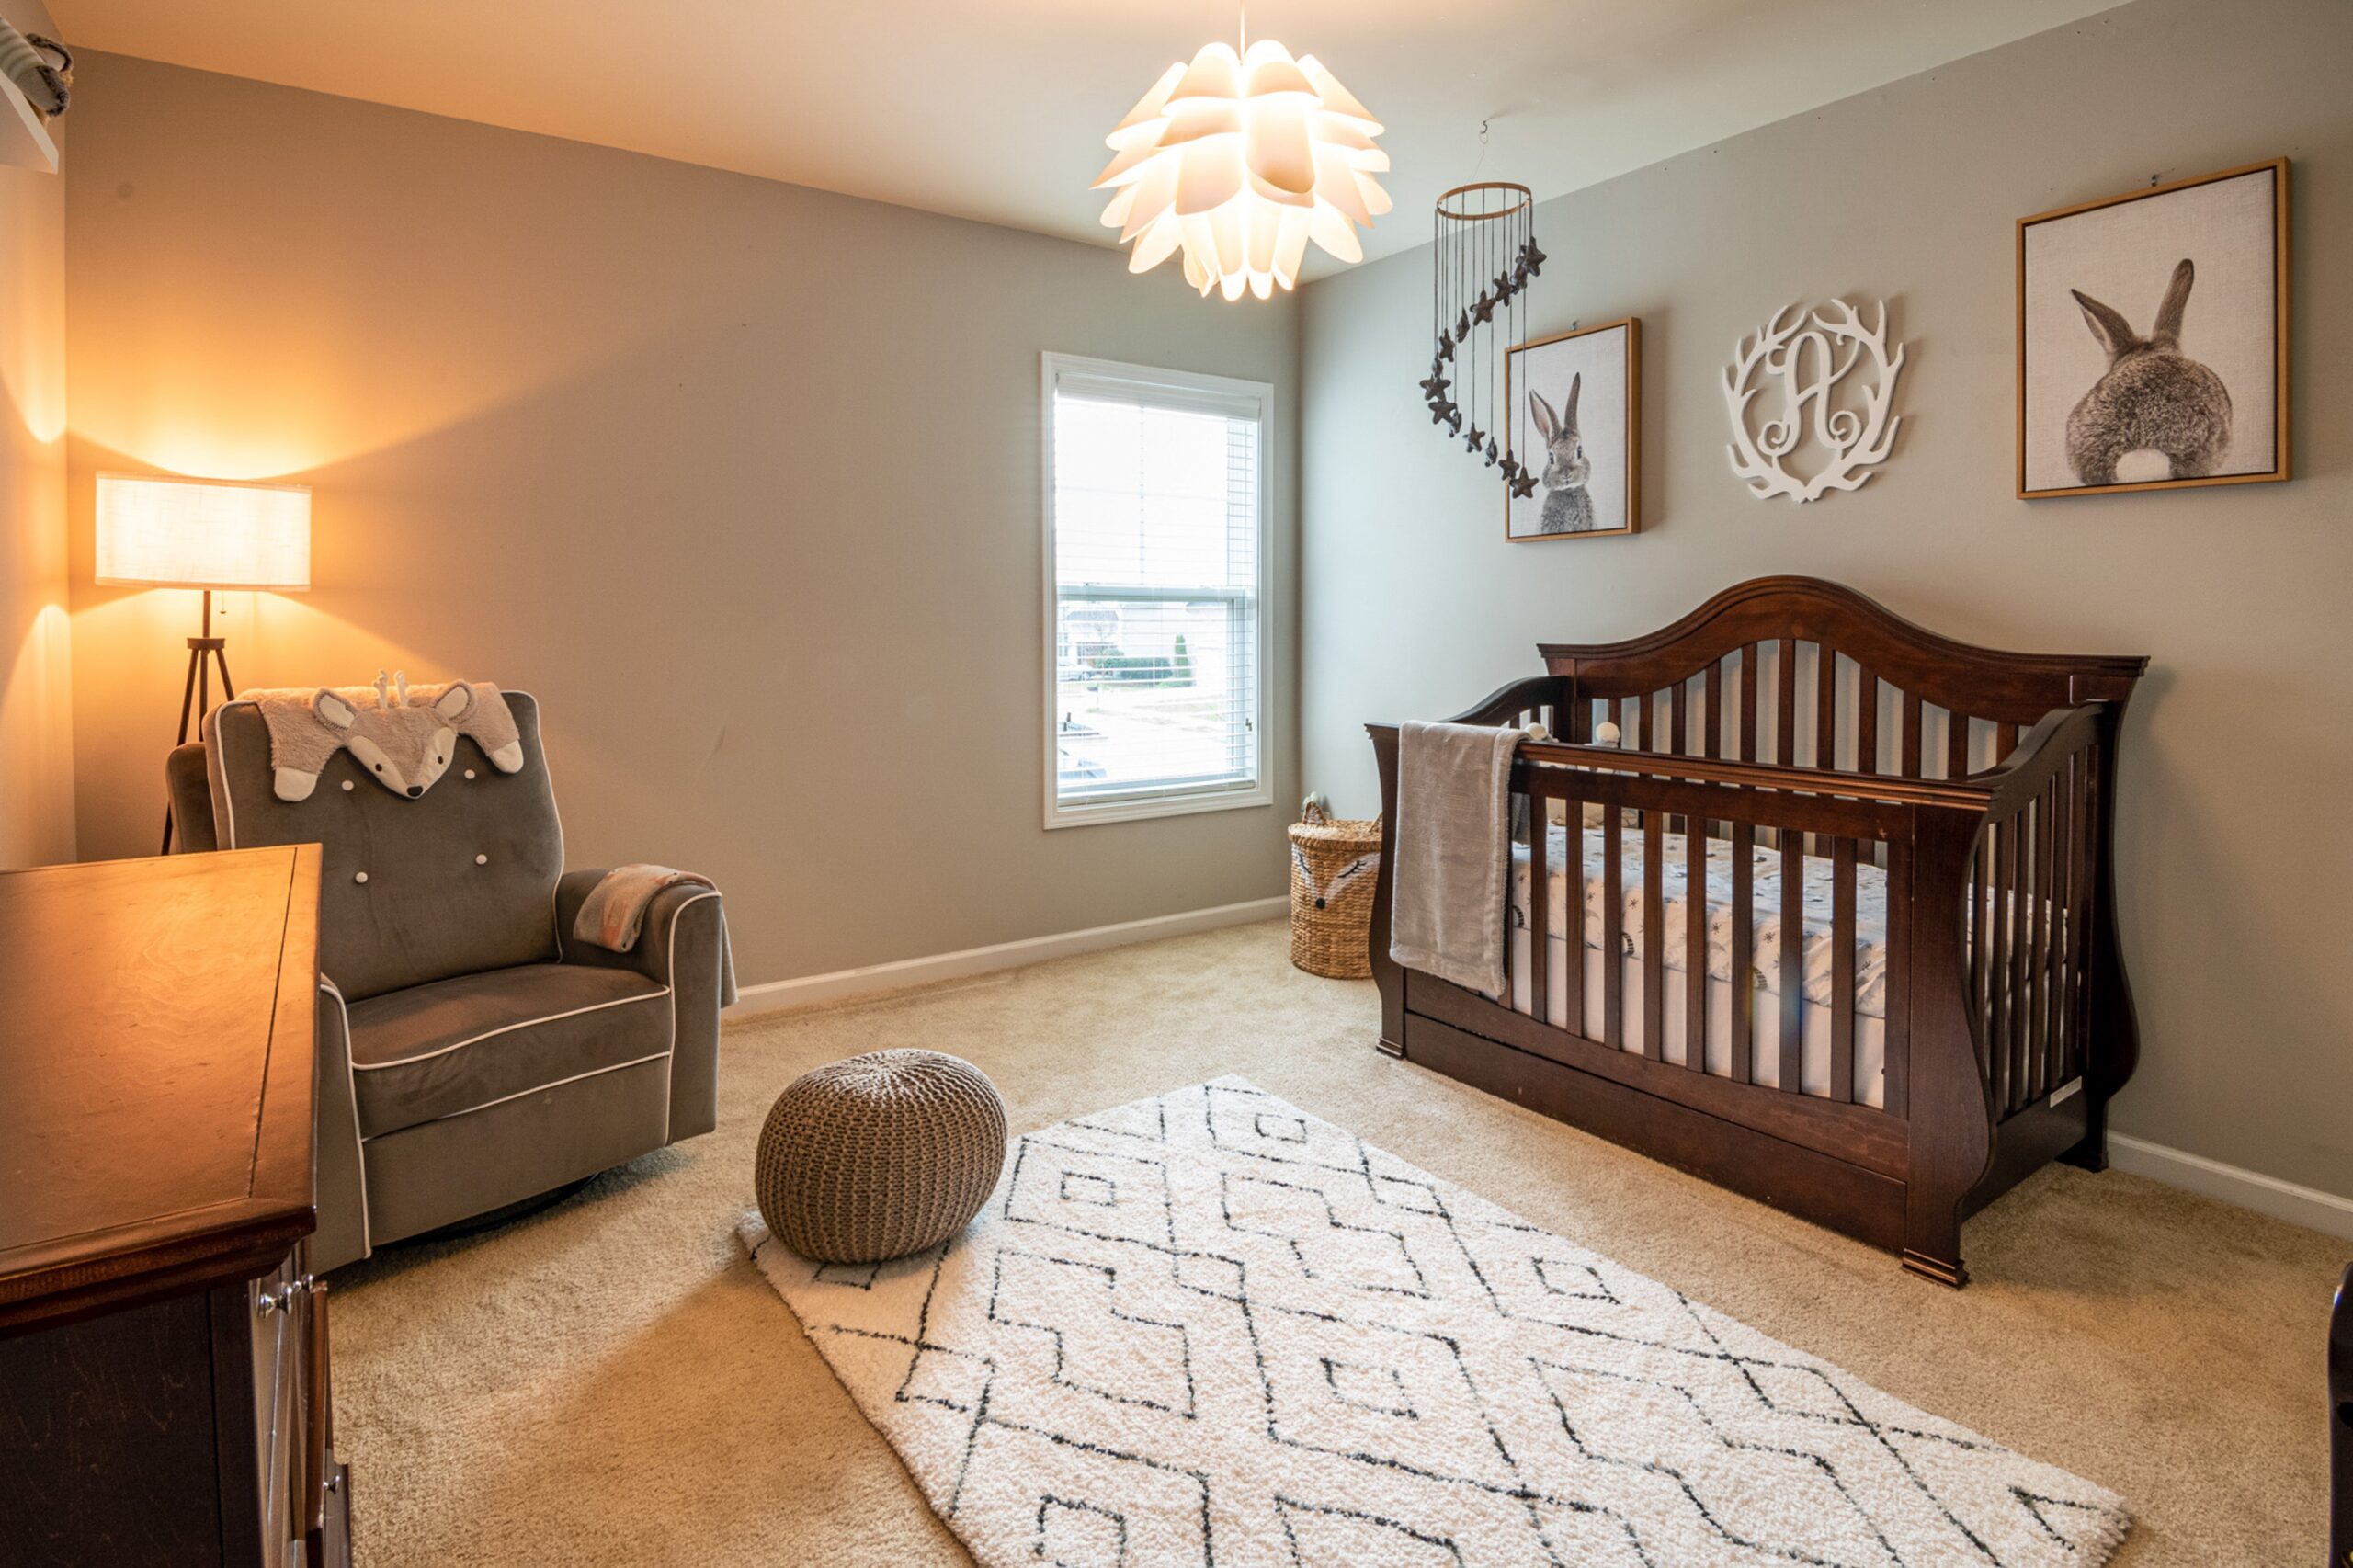 Baby room with wood crib and rocking chair